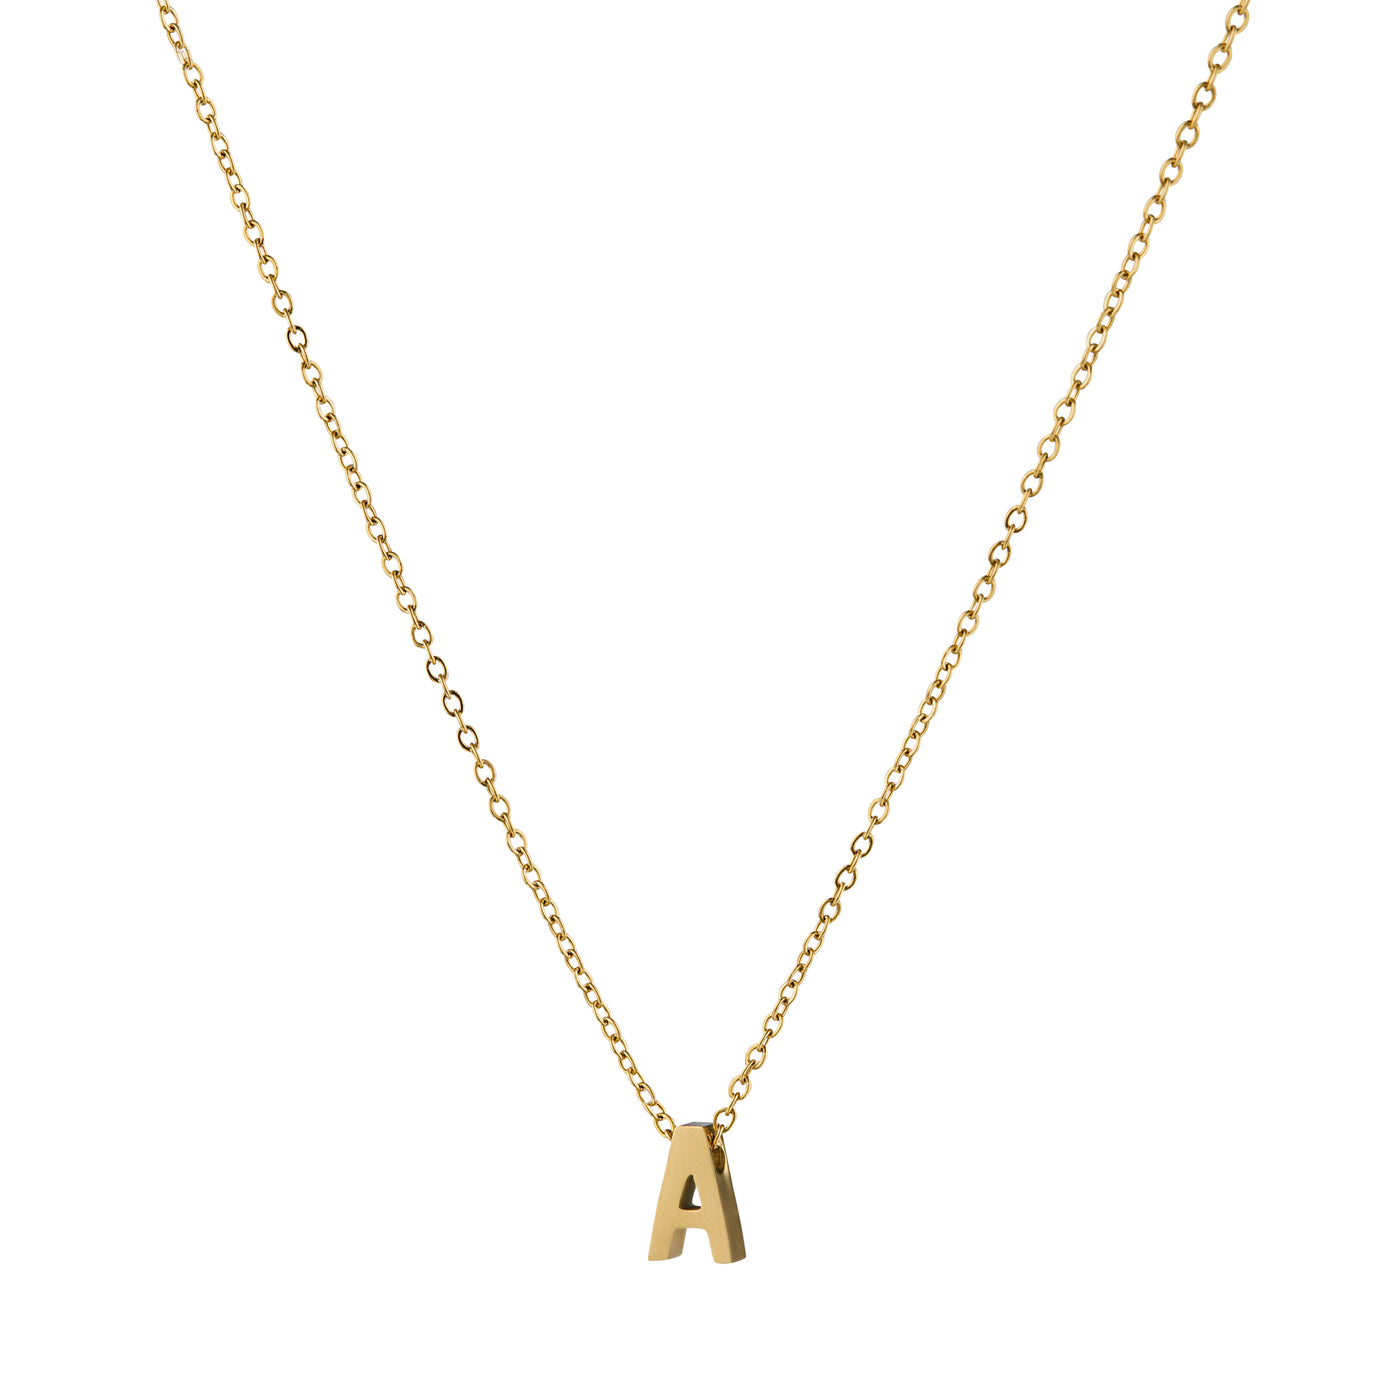 ALPHA CHARM NECKLACES, Waterproof / 18KT Gold Plating